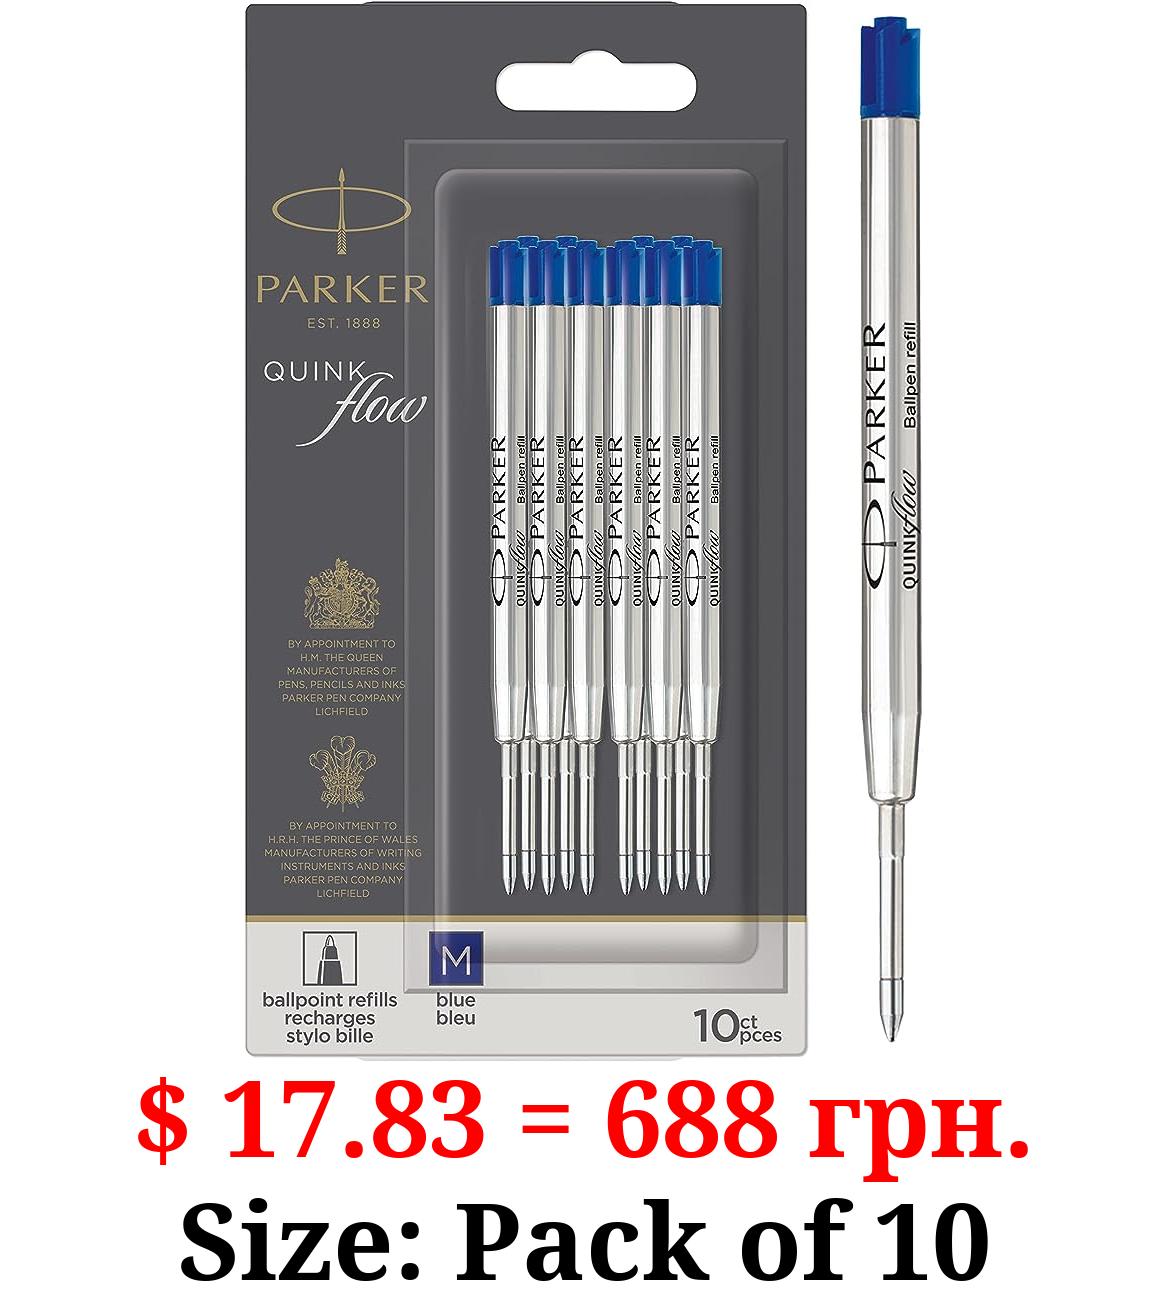 Parker Ballpoint Pen Refills, Medium Point Ink Pen Refills, Blue QUINKflow Ink, Great Stocking Stuffer or Gift for Students, Holiday Teacher Gifts, 10 Count